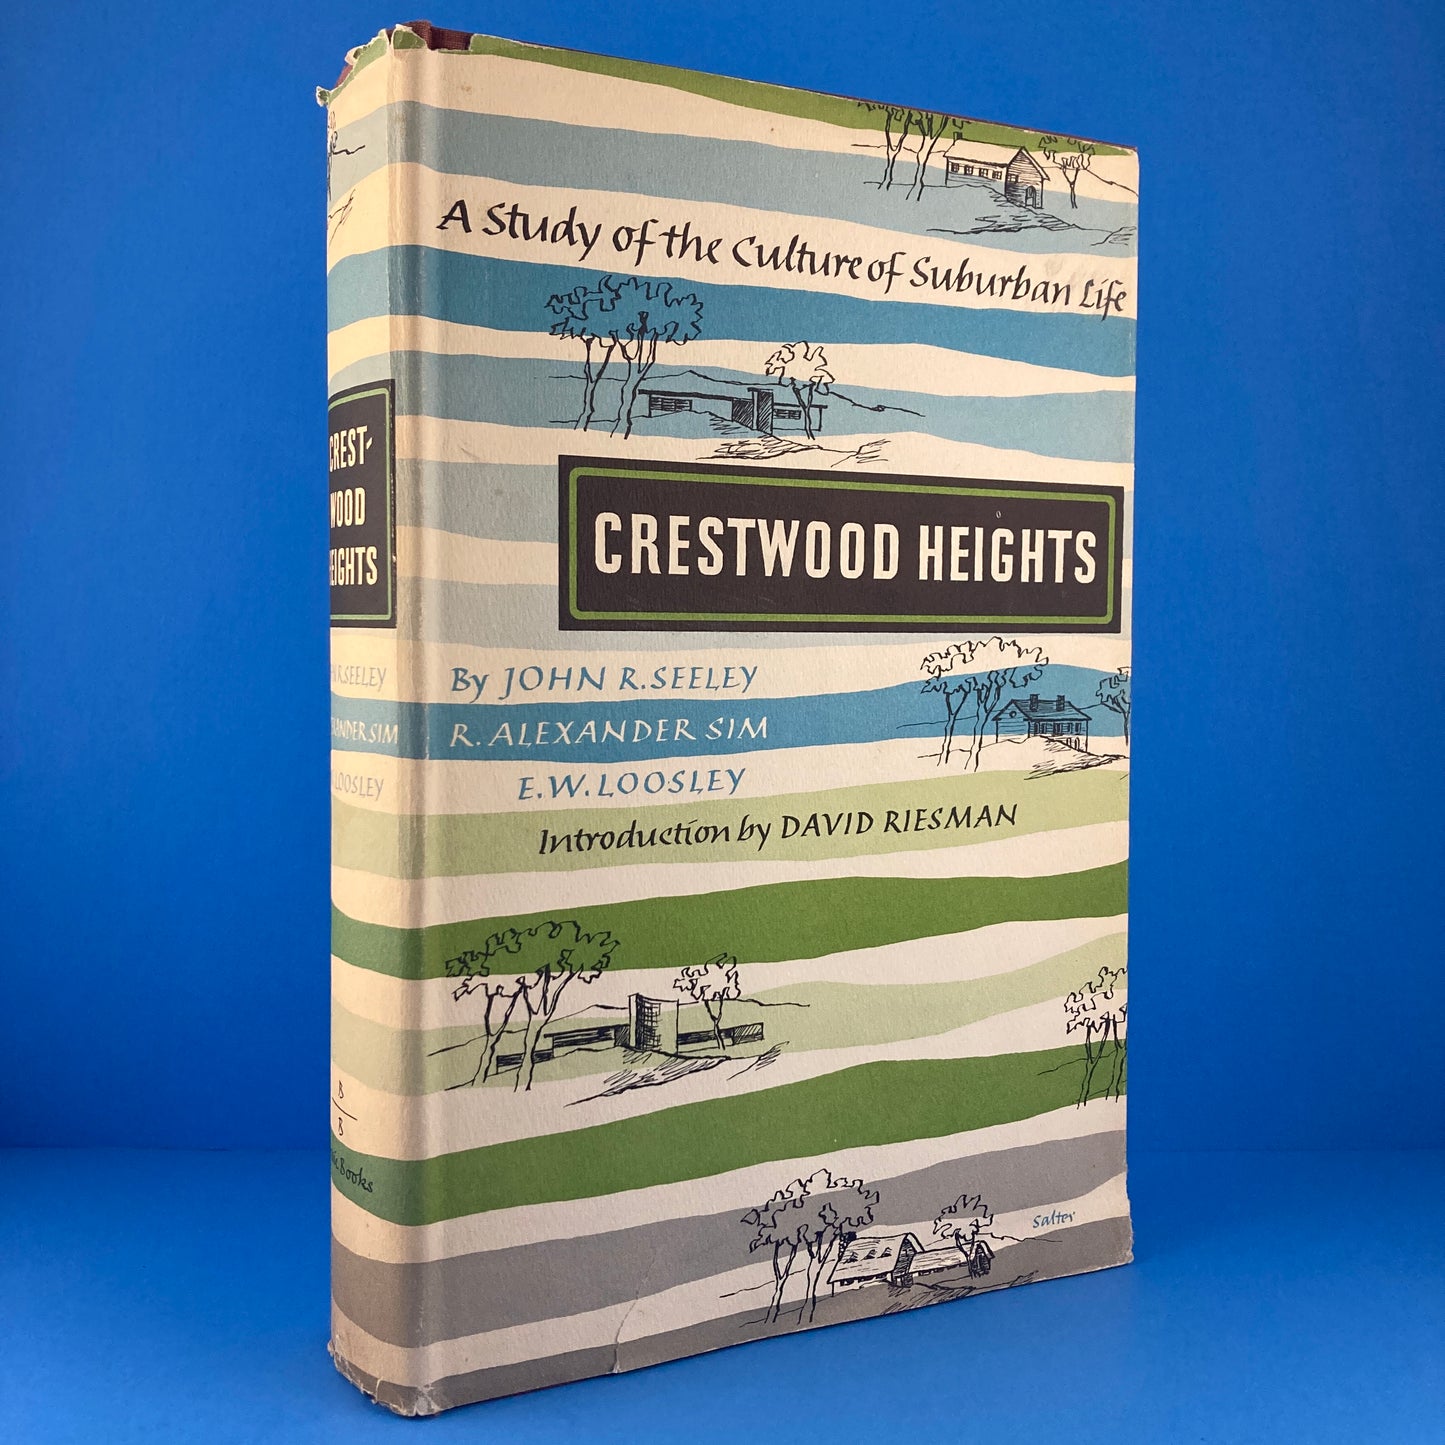 Crestwood Heights: A Study of the Culture of Suburban Life